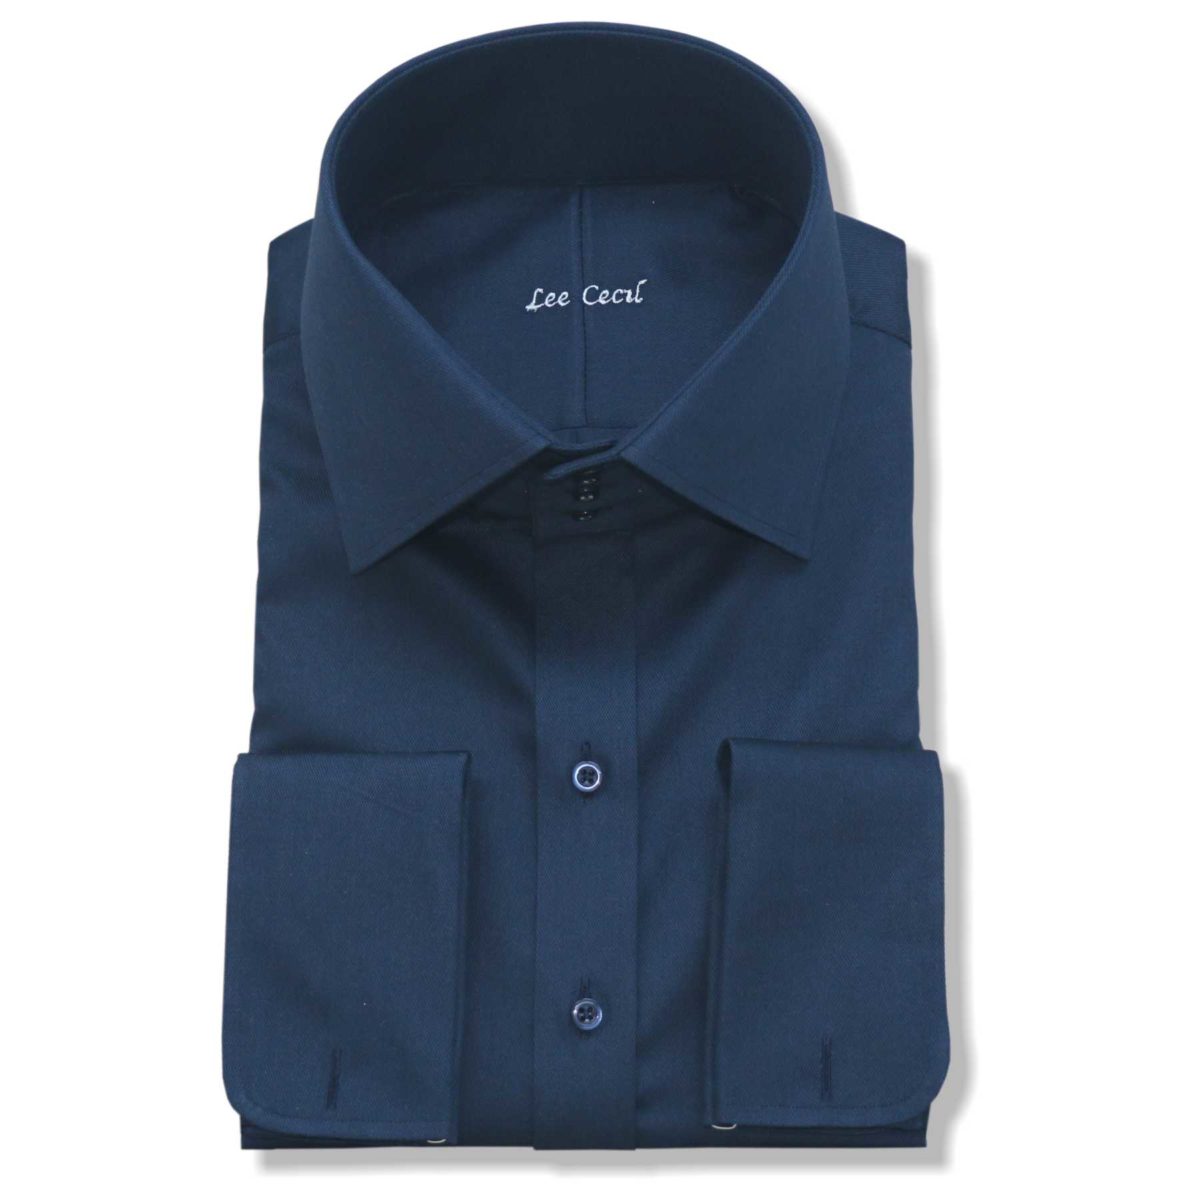 high spread navy colored high color shirt